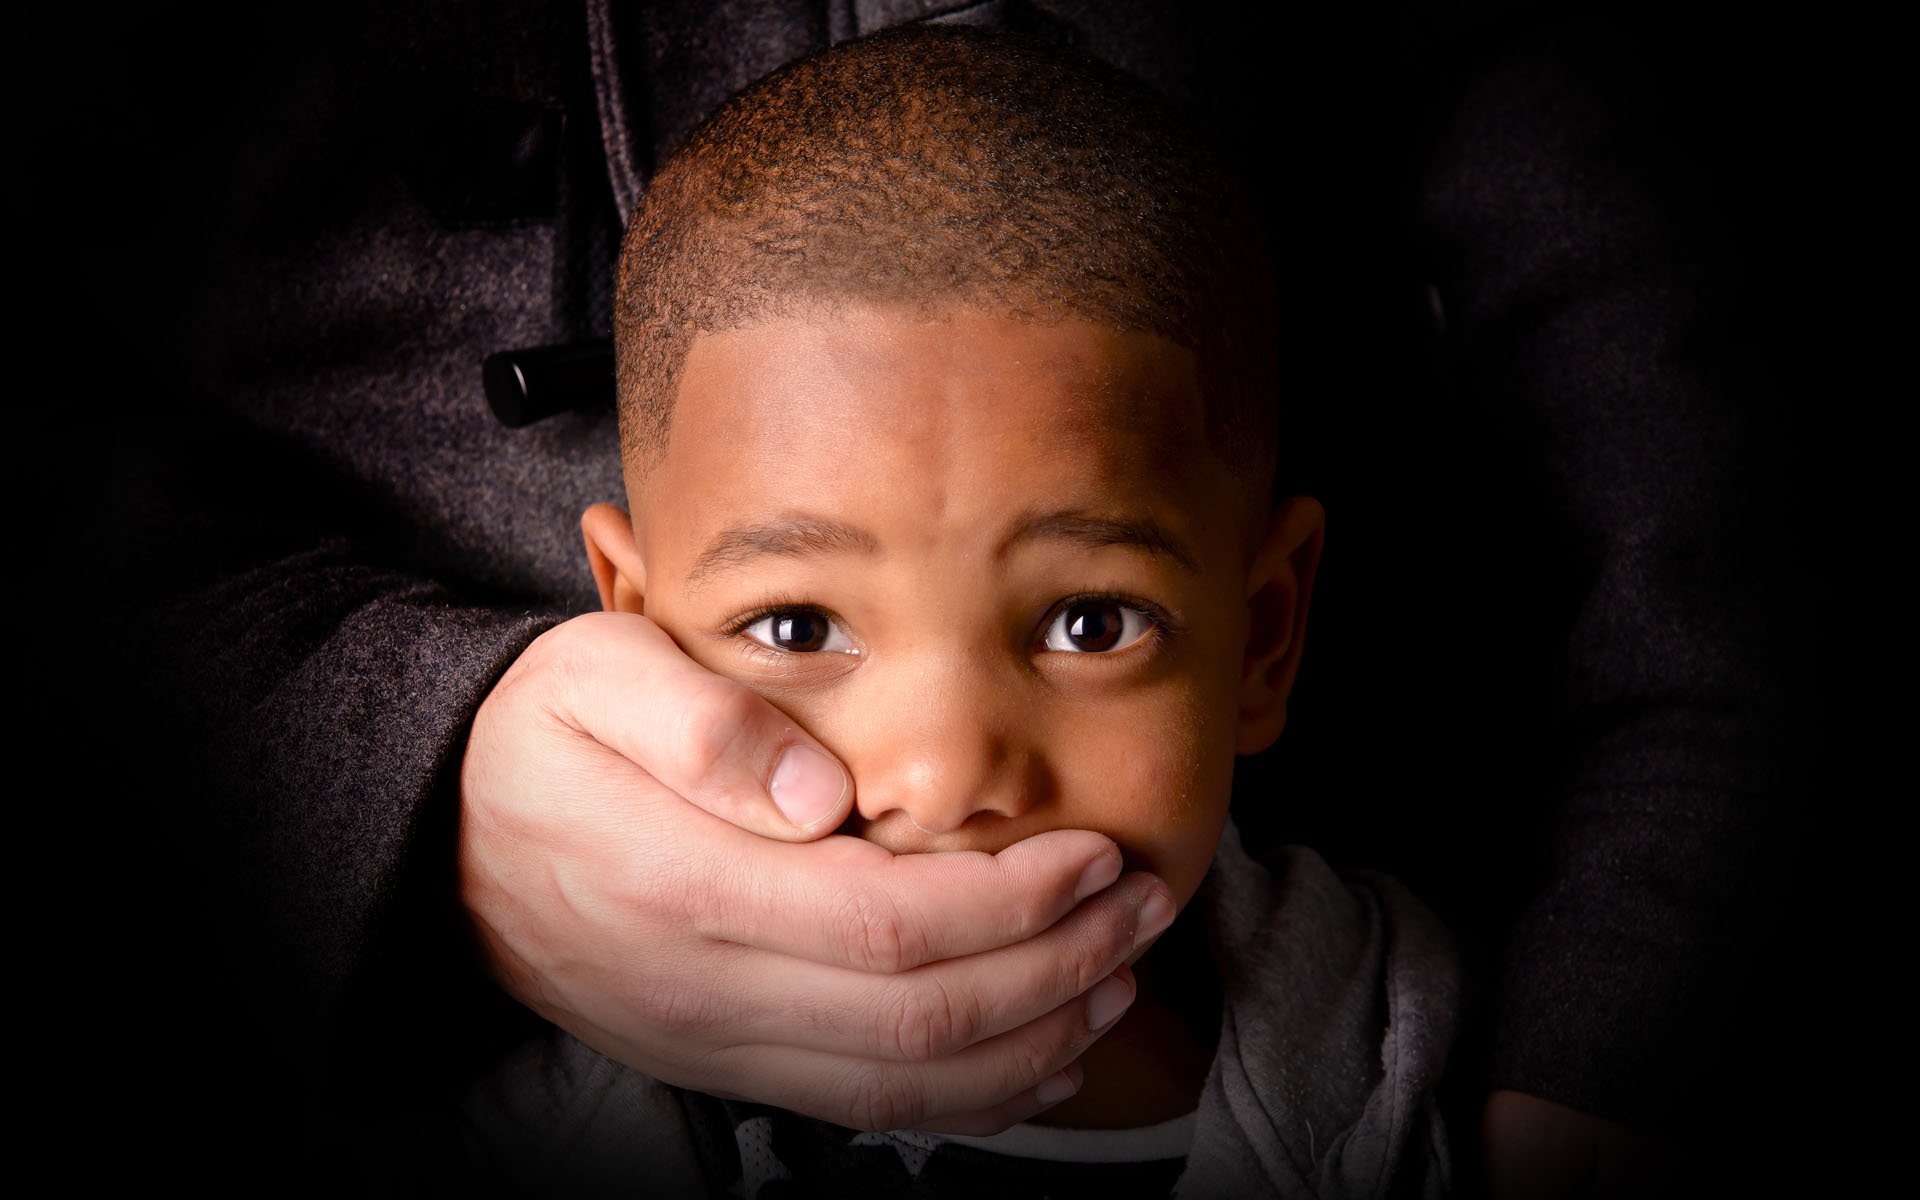 The kidnapping of kids – tips to help prevent it